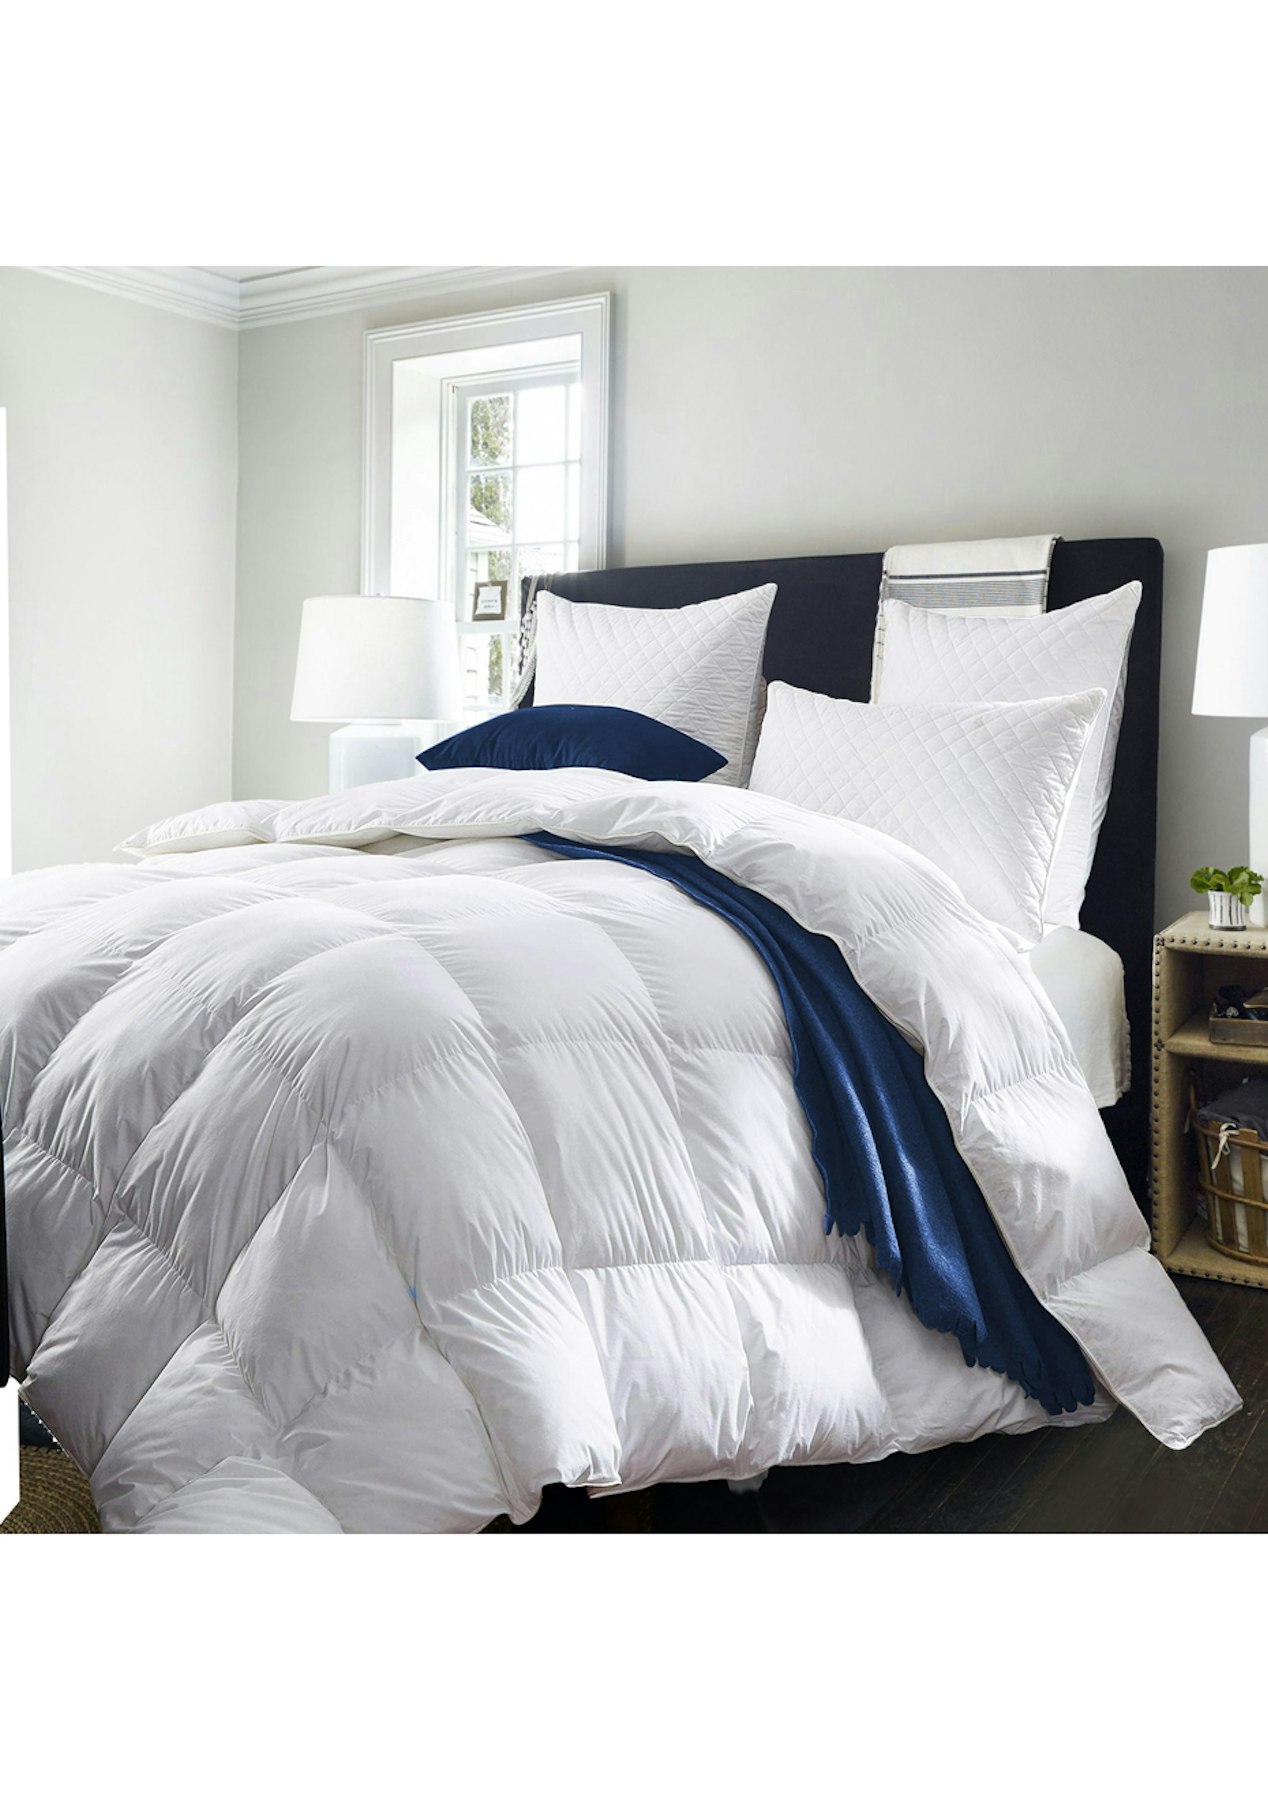 Royal Comfort 50 50 Goose Feather Down Quilt King Size 500gsm